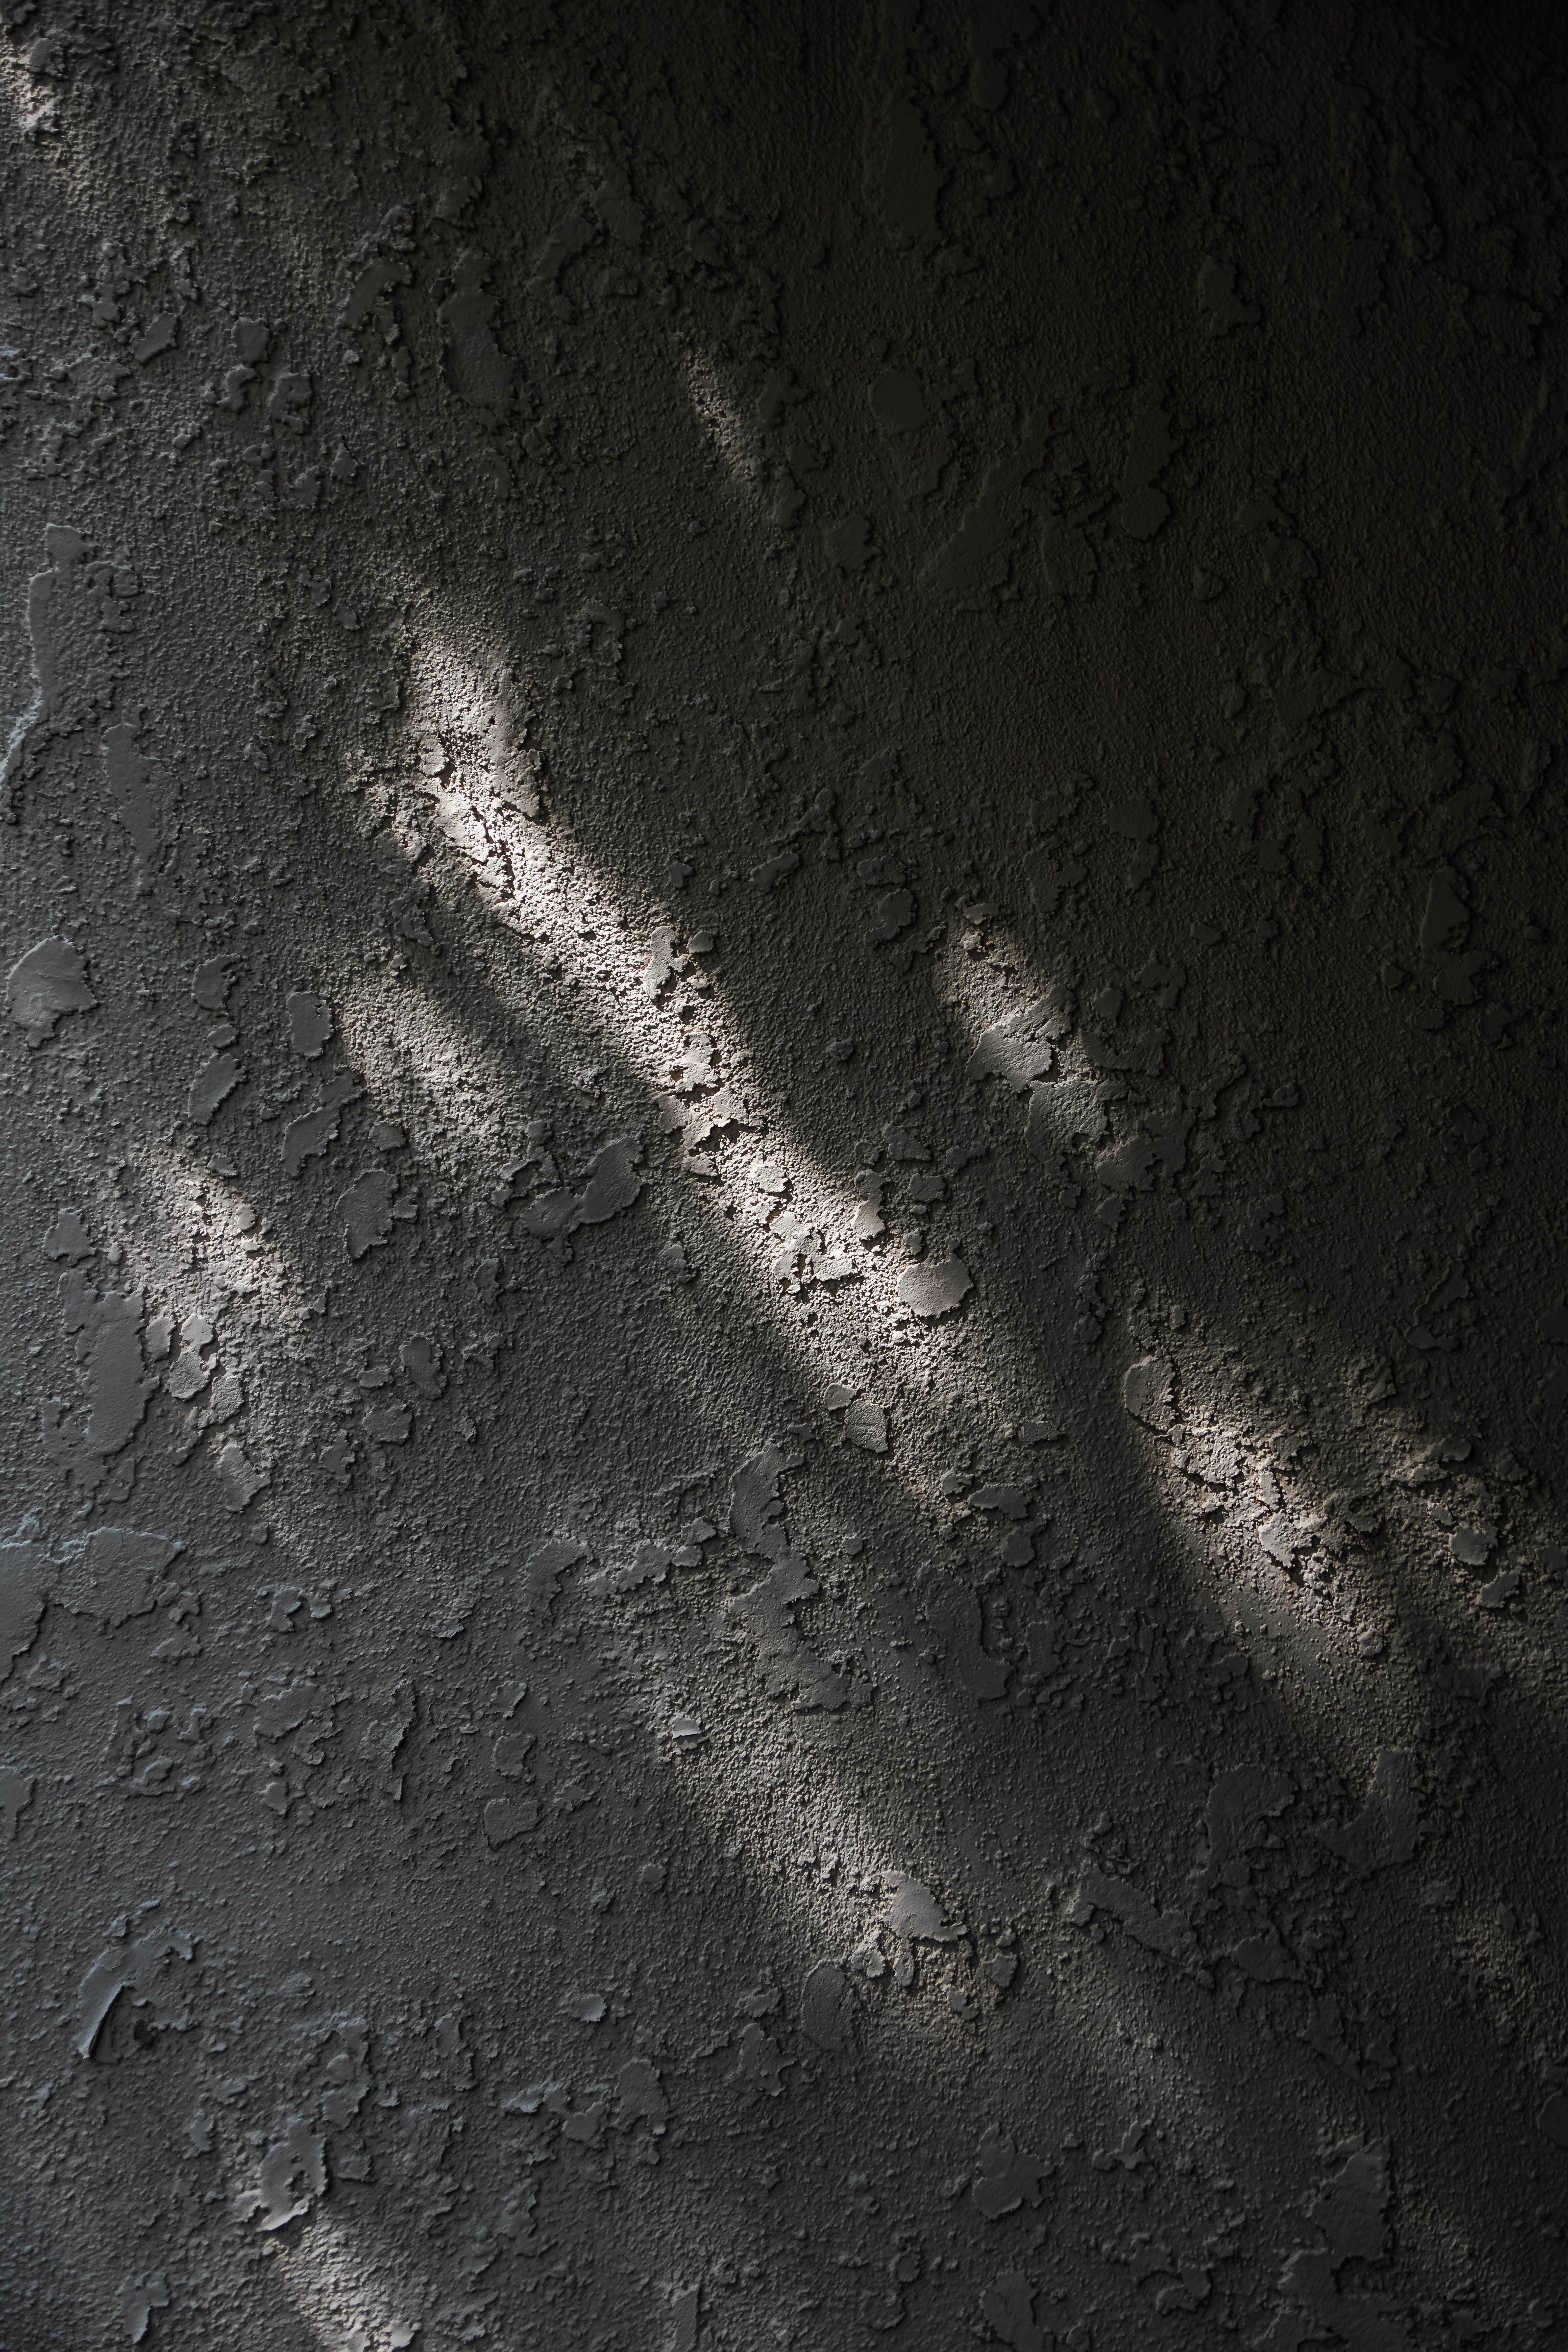 Windows Backgrounds texture, textures, beams, rays, wall, bw, chb, shadows, plaster